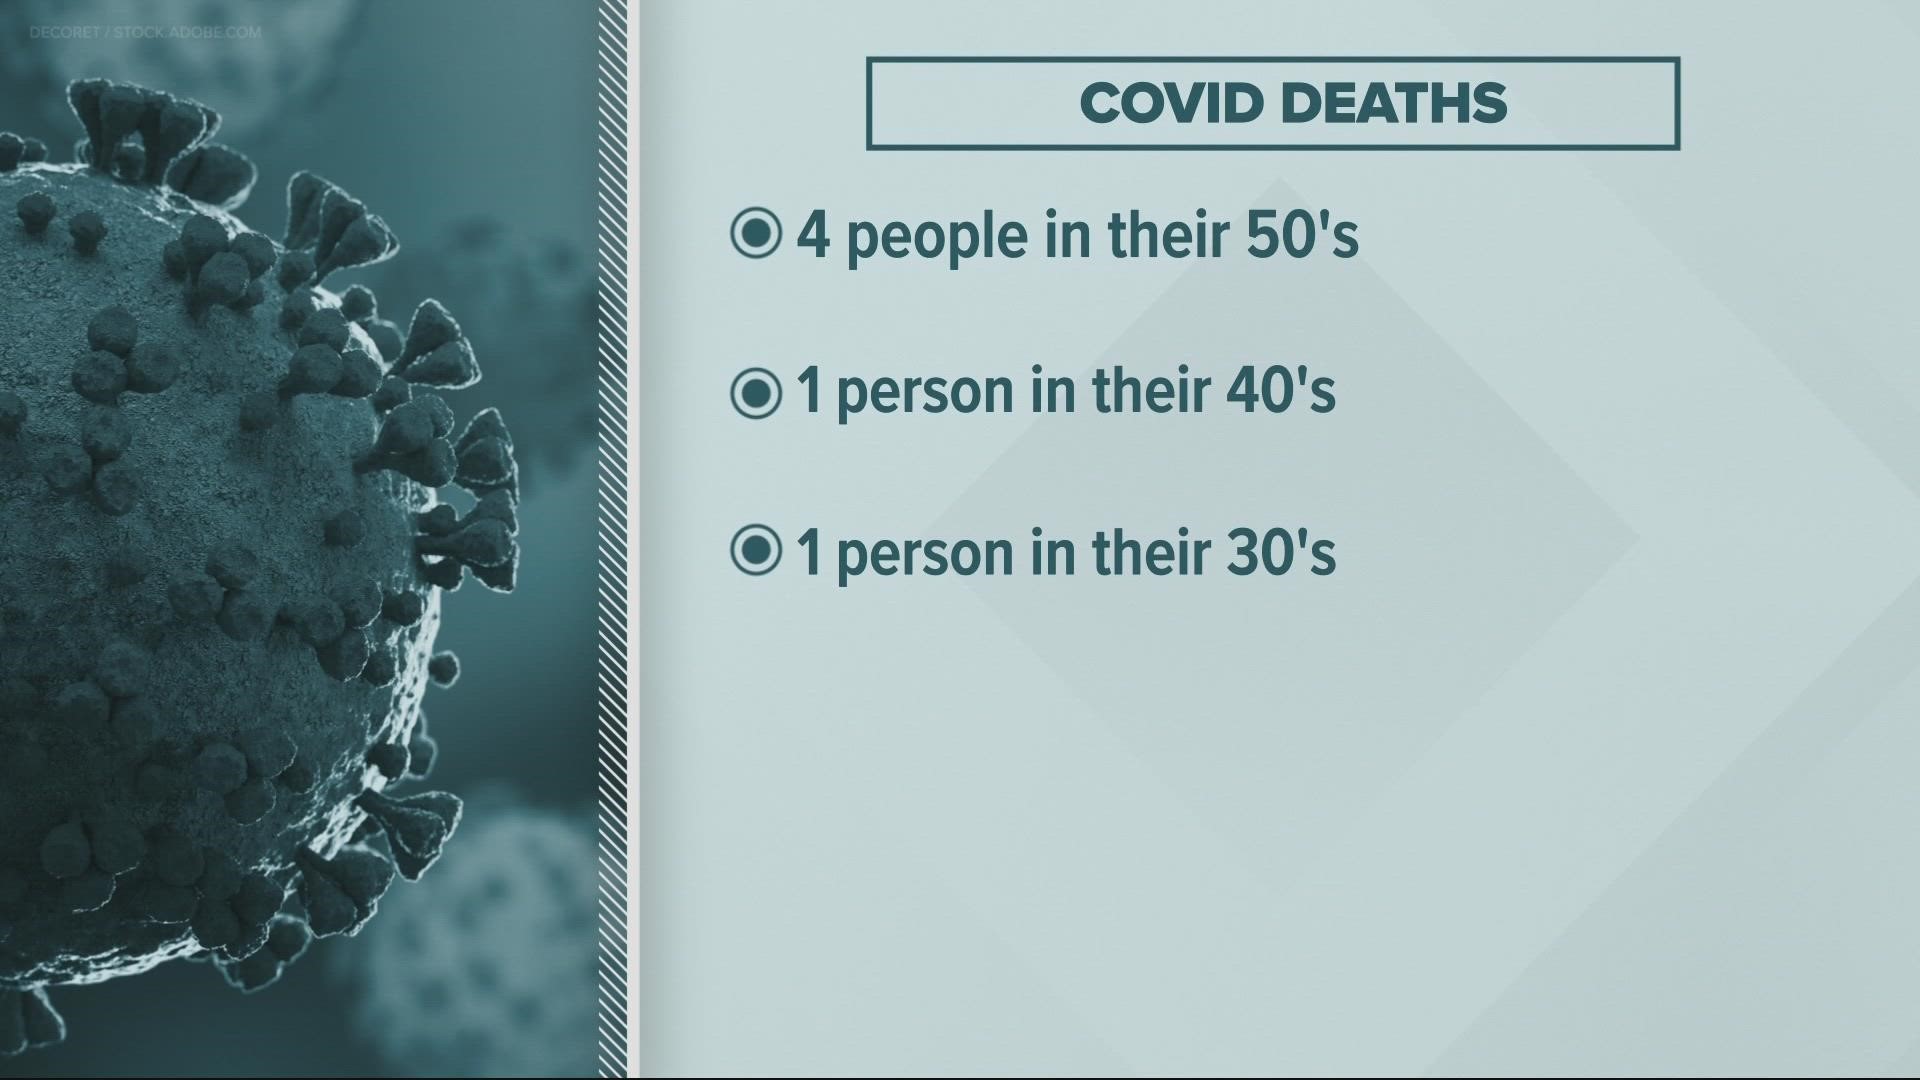 Unlike reporting new cases and hospitalizations, reporting COVID-related deaths is a slower process. KGW's Tim Gordon explains.